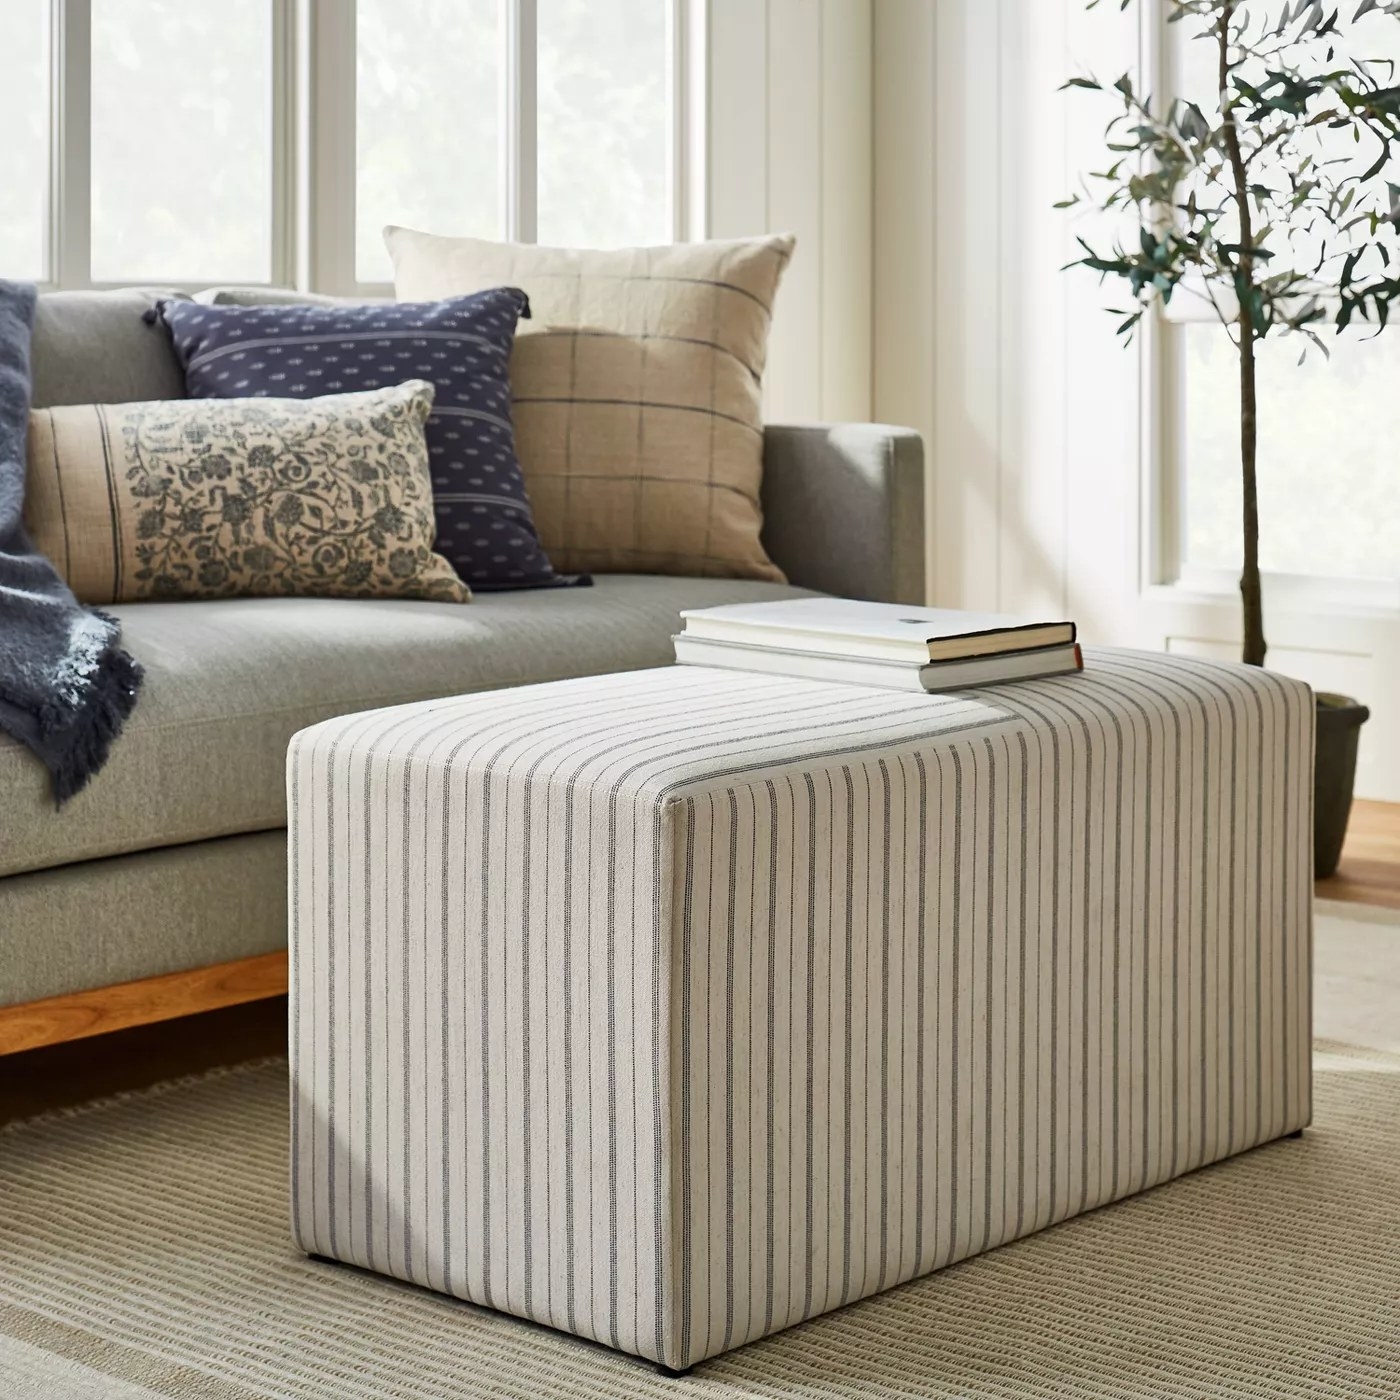 The upholstered cube being used as a coffee table in a living room